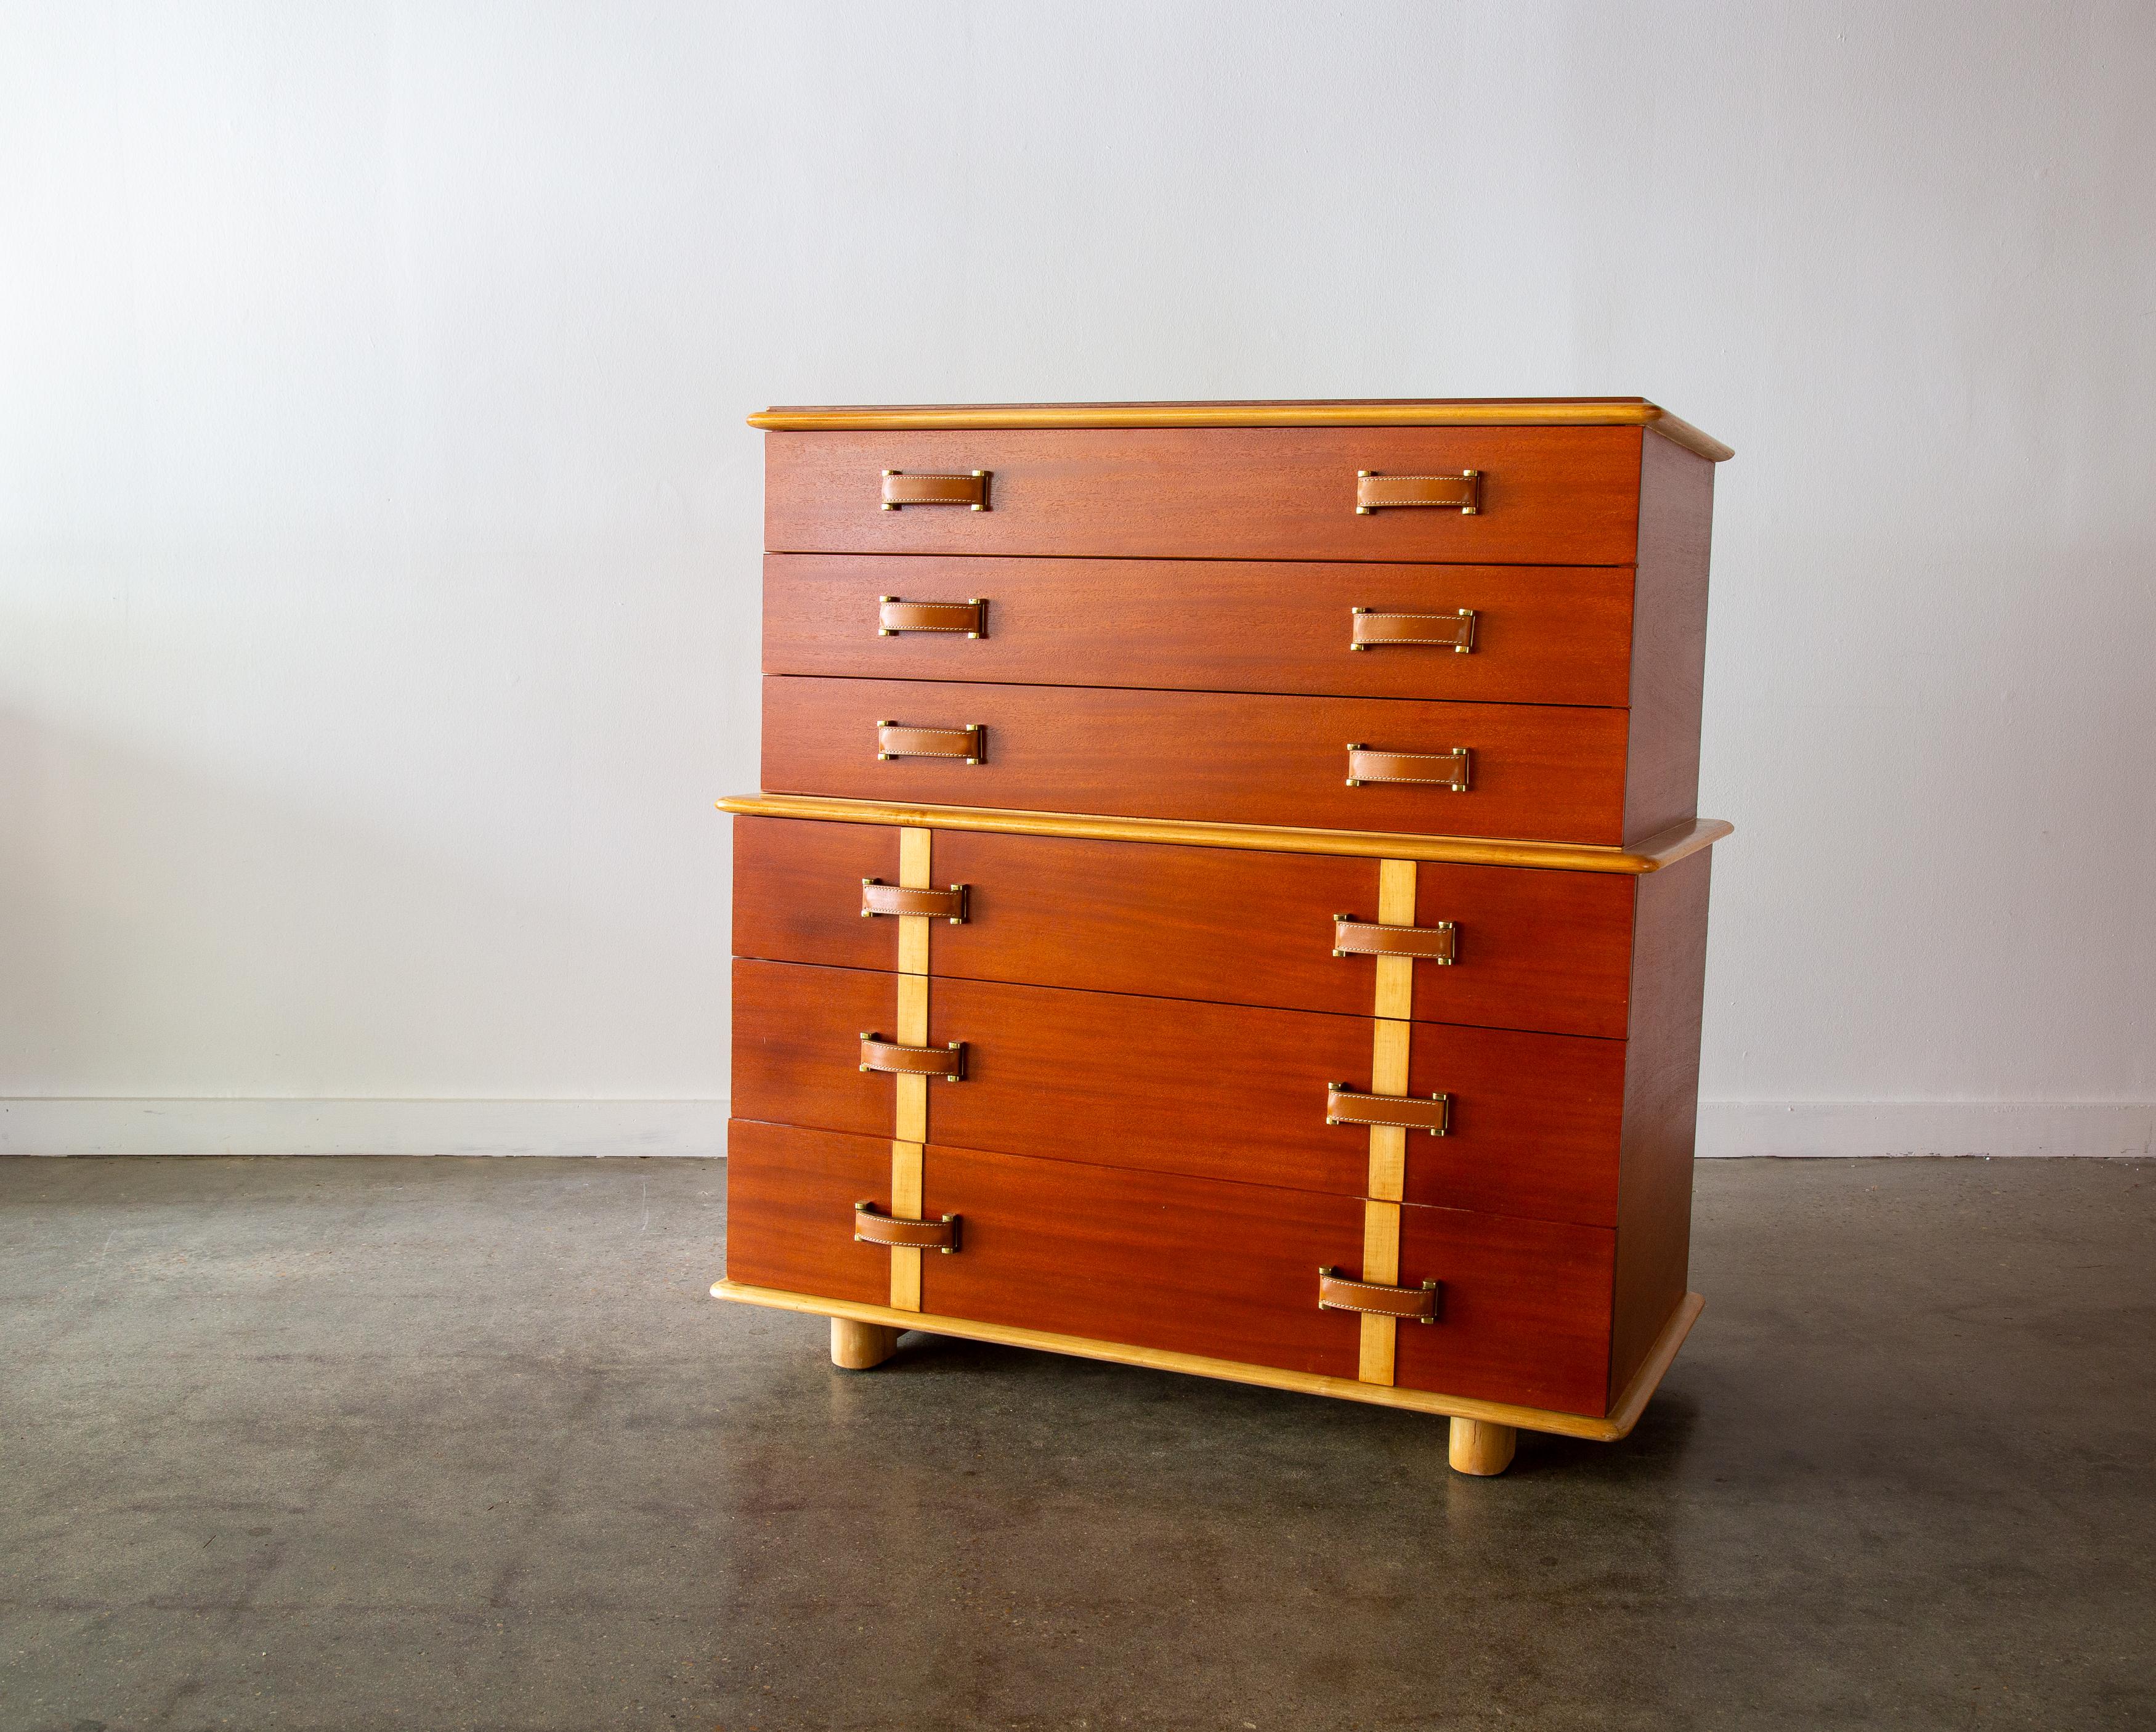 A 1940s Mid century Modern Paul Frankl Cabinet Chest of Drawers. A part of the station wagon series in contrasting Philippine  and Rock Mahogany and Maple featuring brass and leather handles. Interiors of the drawers in oak. Manufactured by the